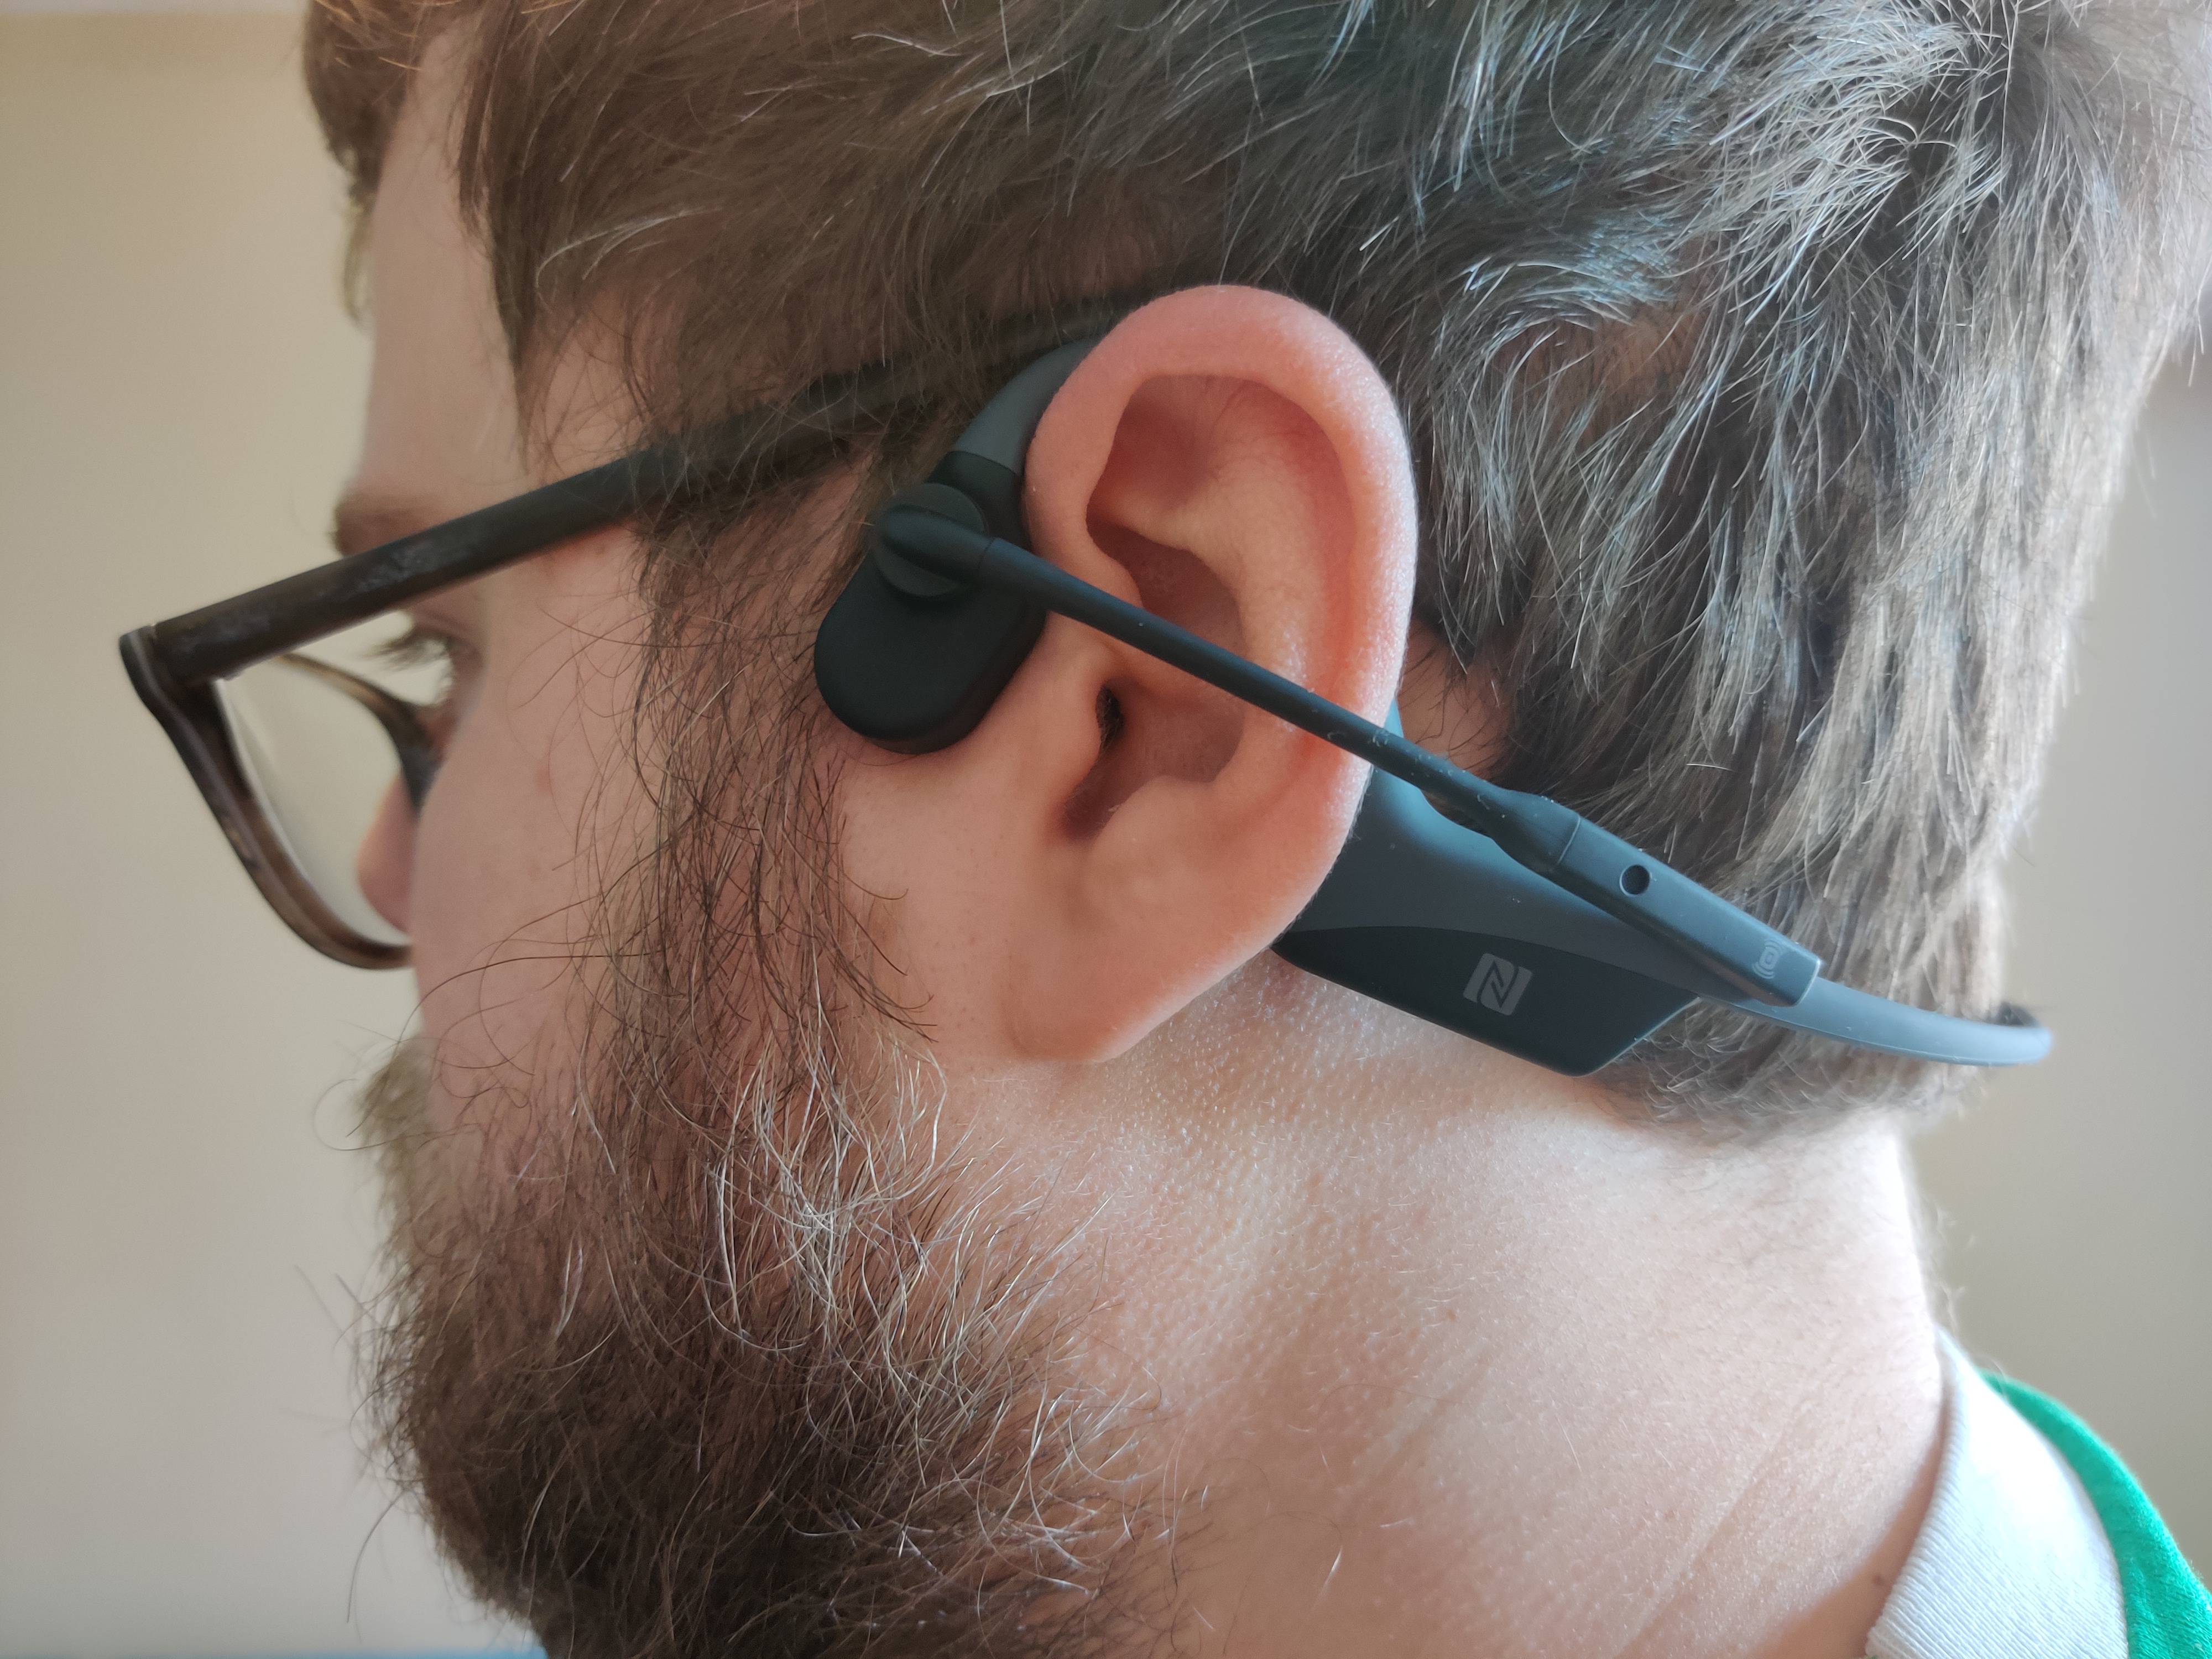 AfterShokz OpenComm Bone Conduction Bluetooth Headset Review: Much